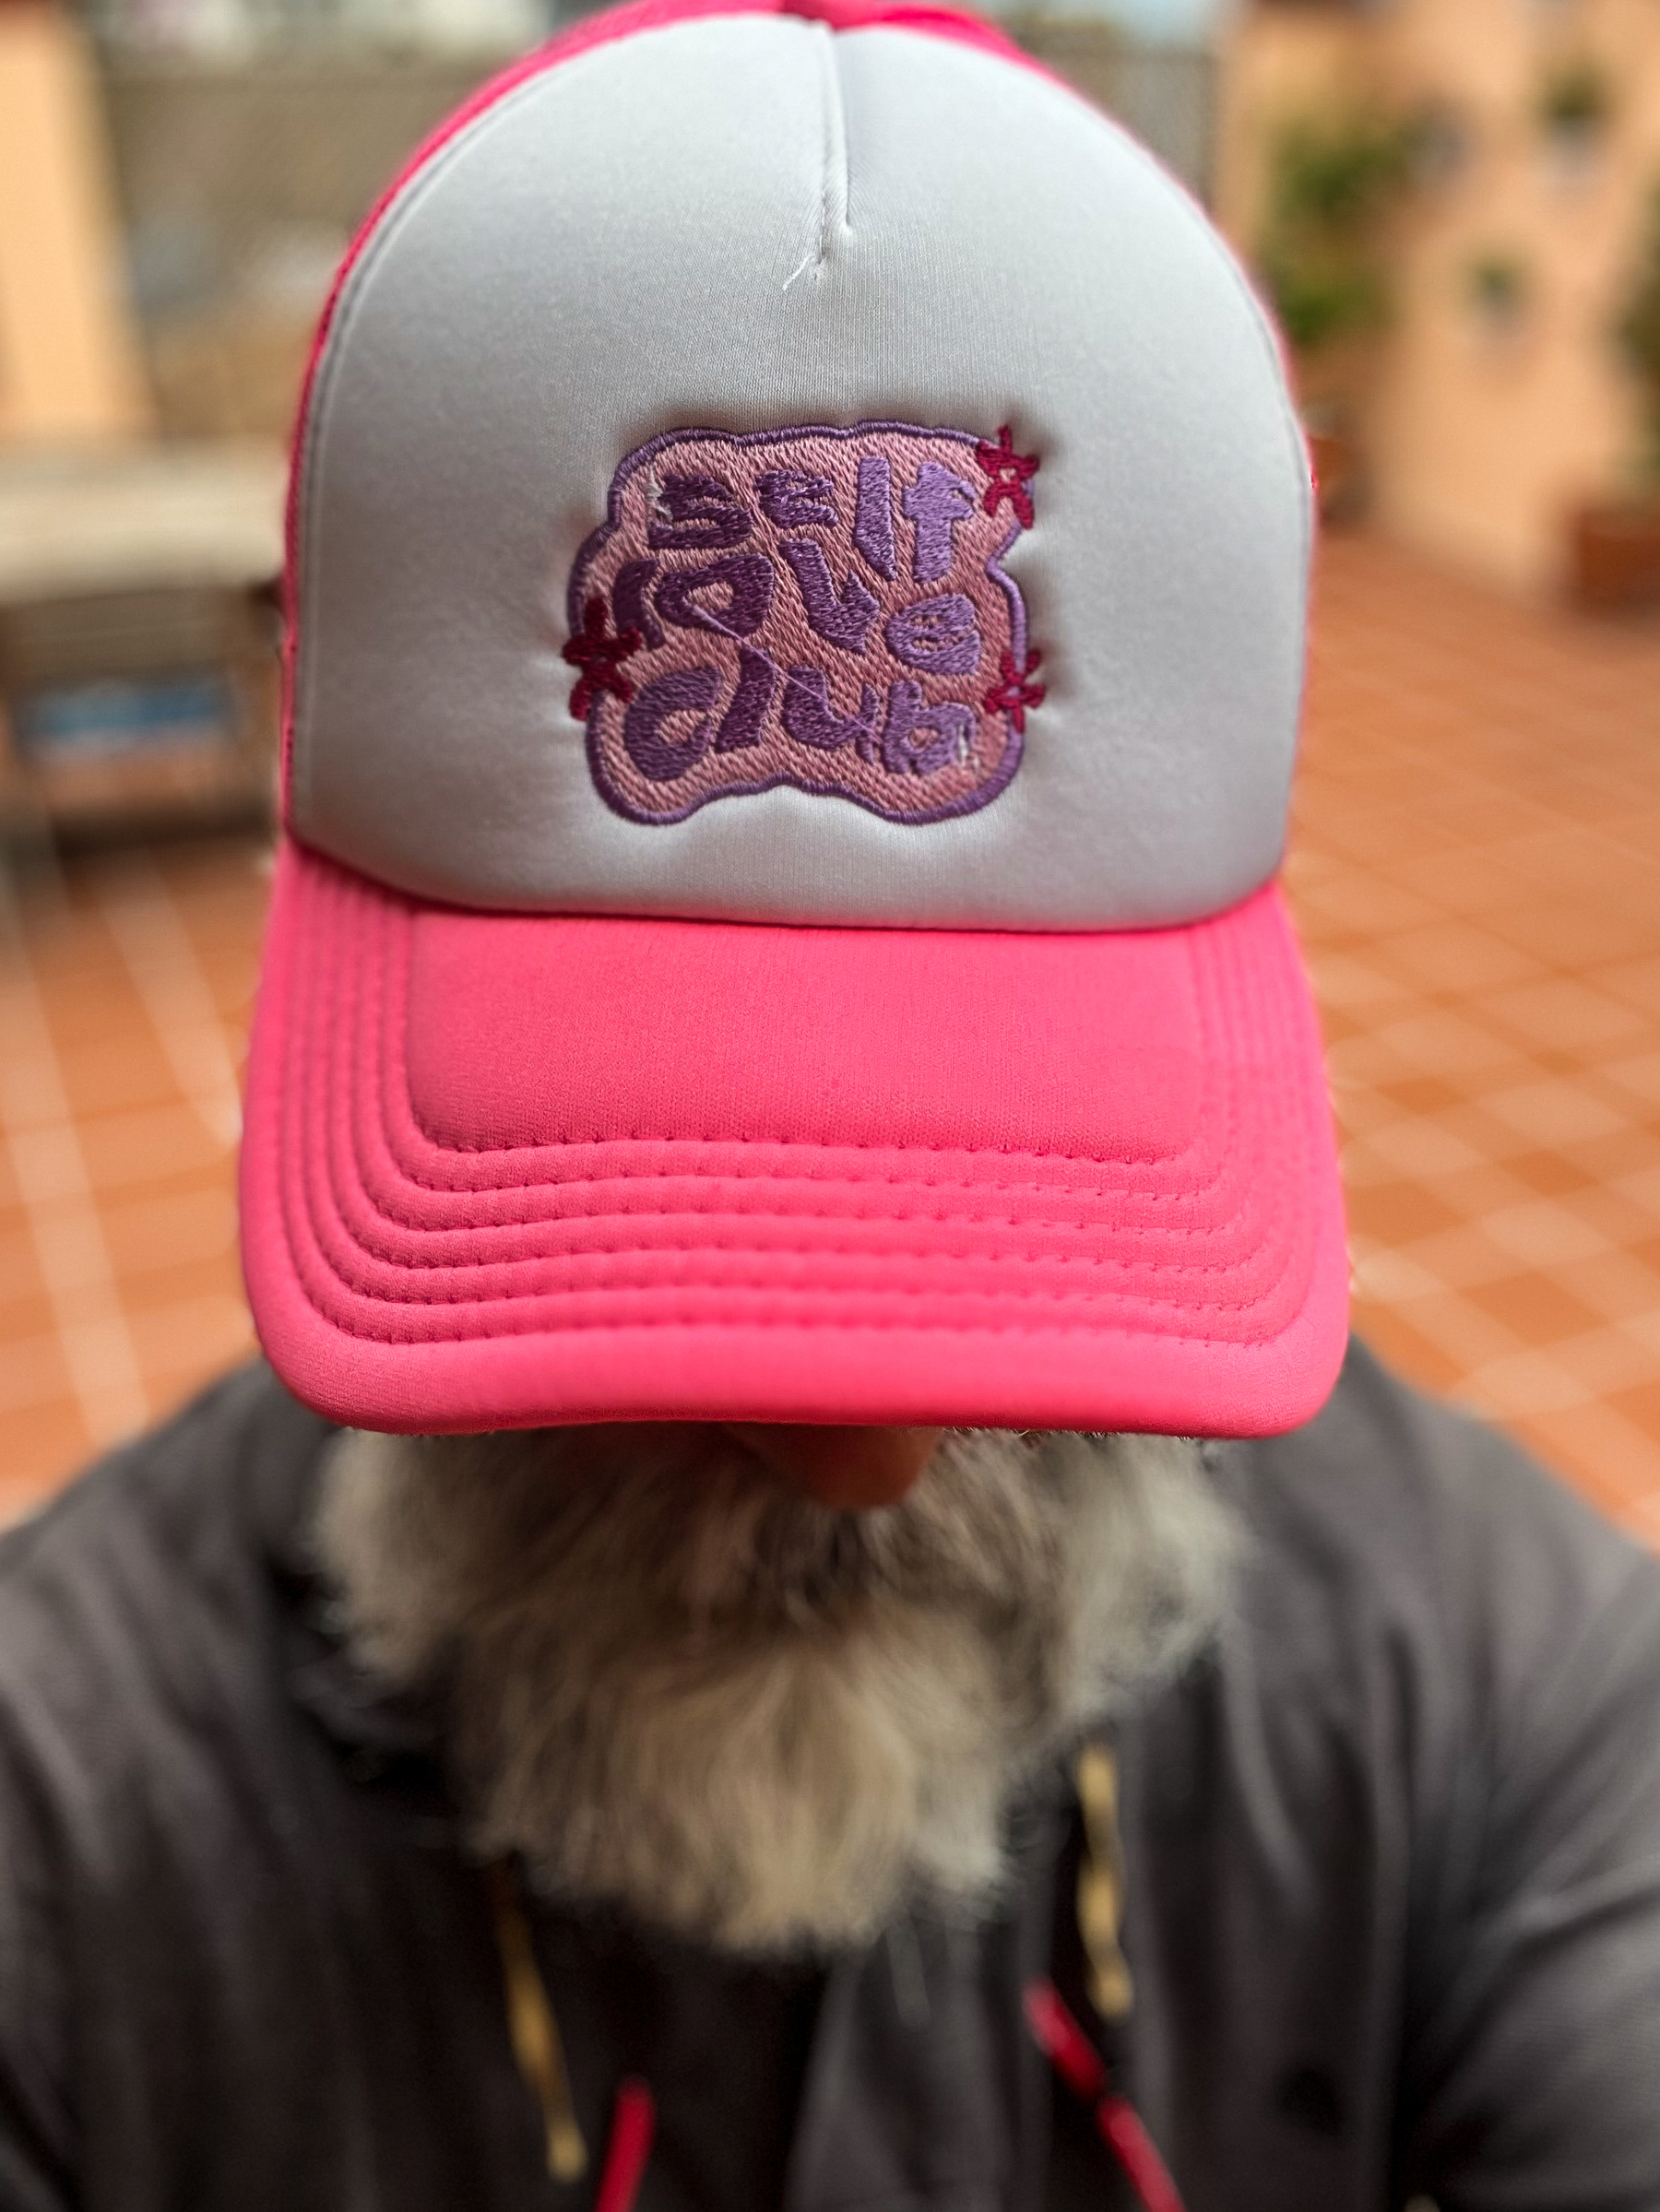 Man wearing a pink trucker hat, with “self love club” embroidery. 